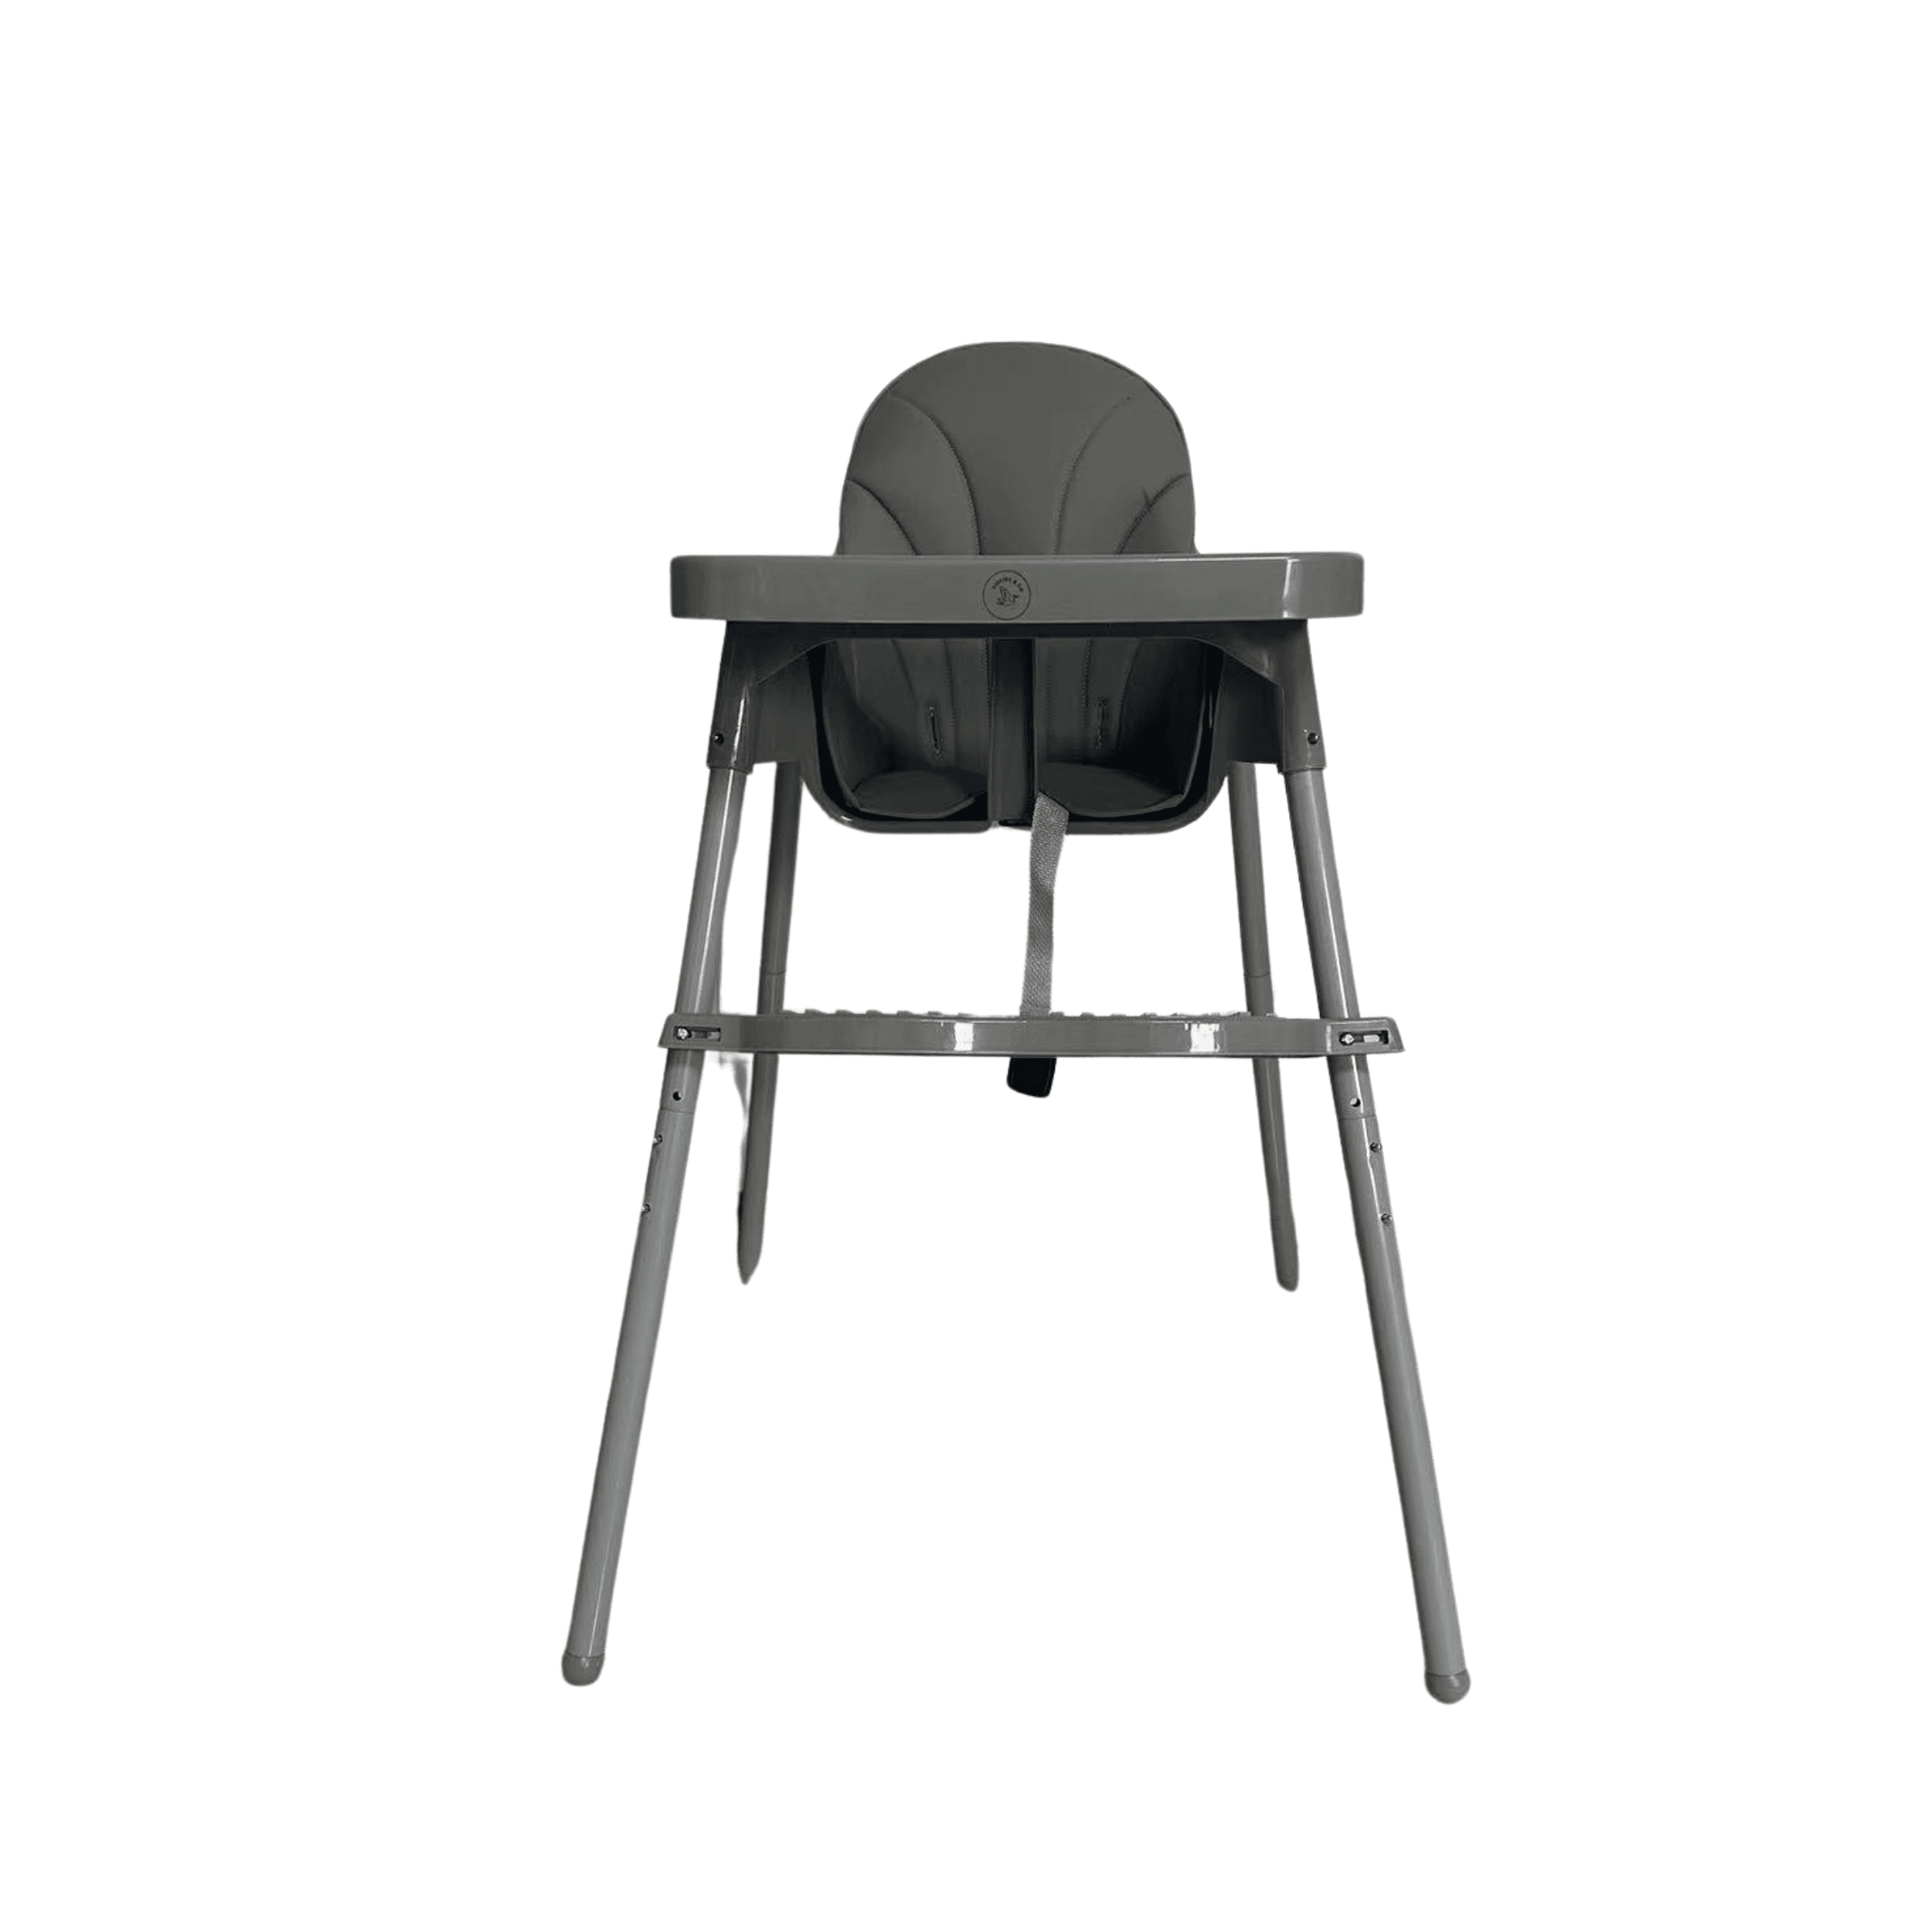 High chair for kids - grey